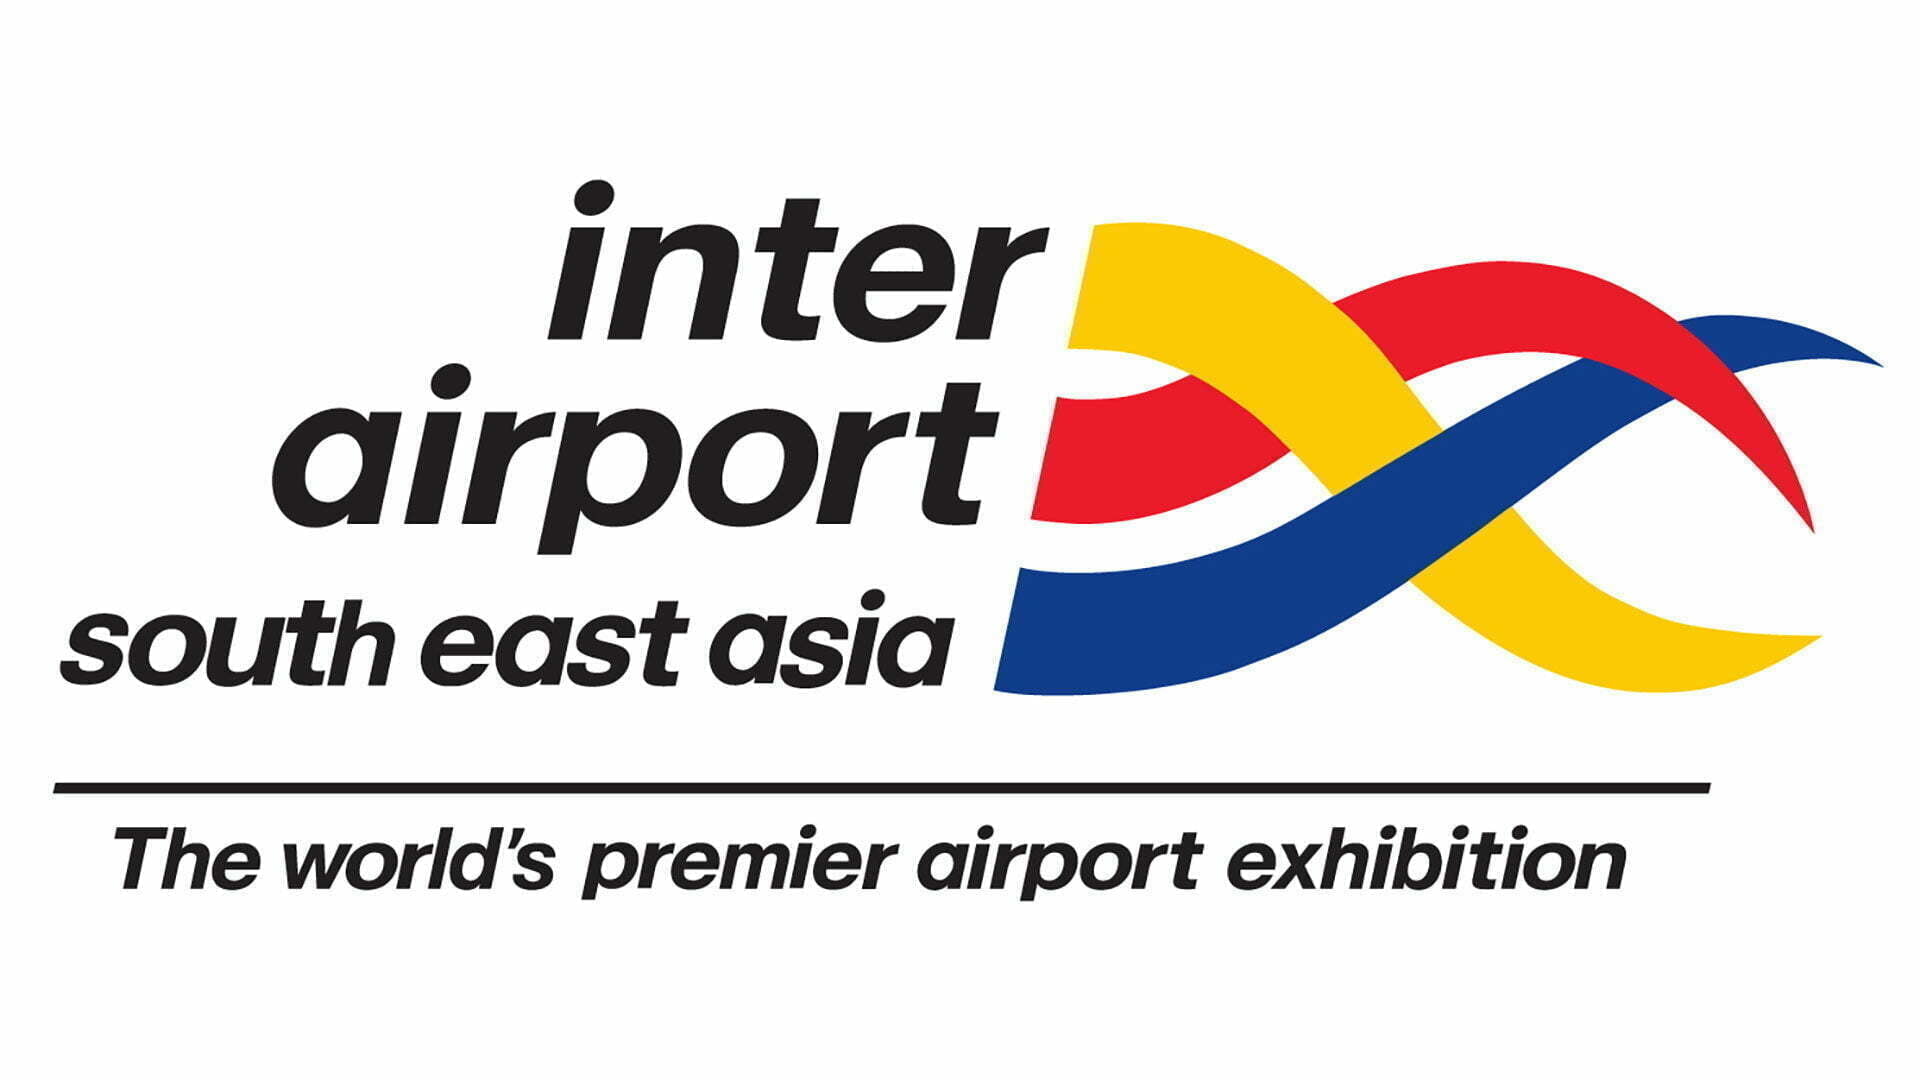 inter airport south east asia